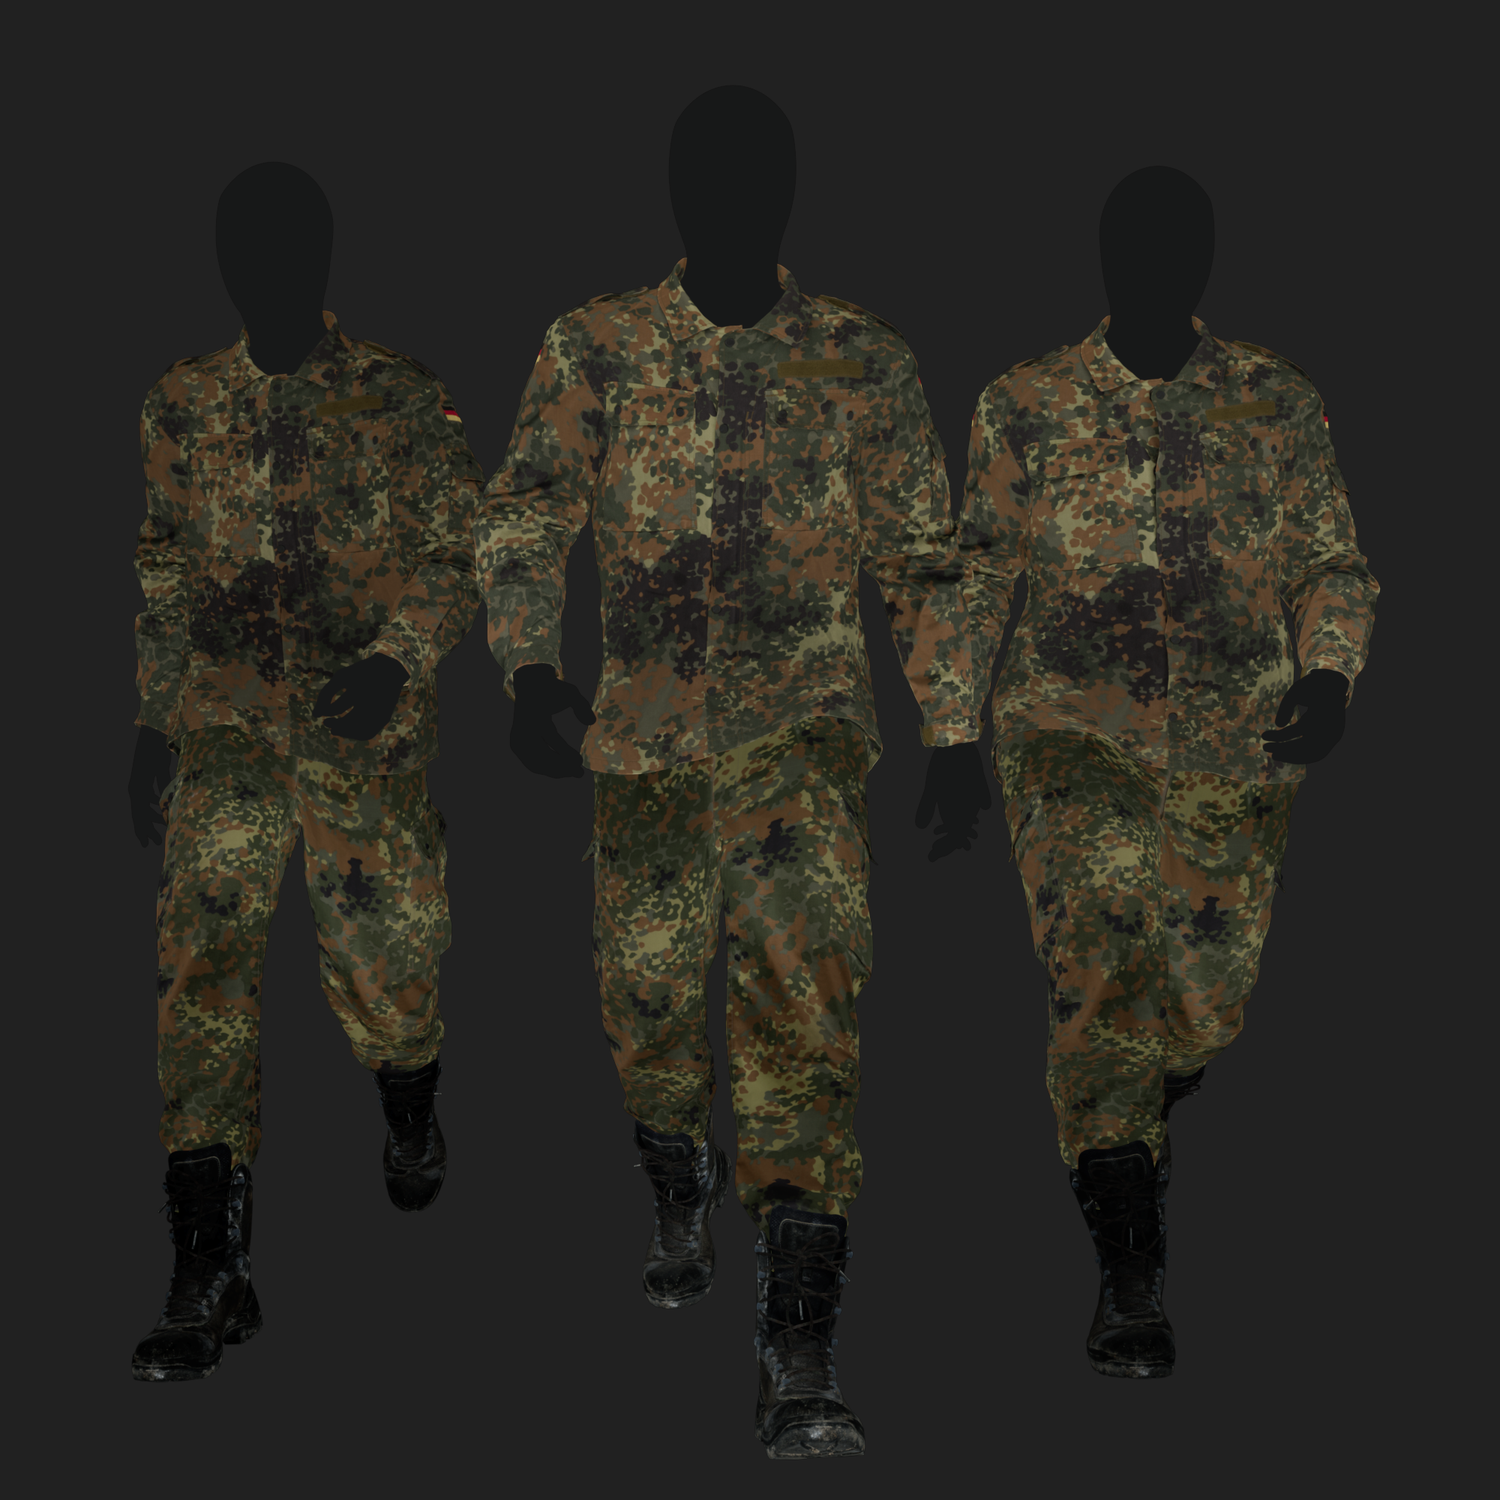 Albedo (Diffuse) map rendering of a 3D model of an animated walking male character dressed in: Germany Bundeswehr Uniform - front view